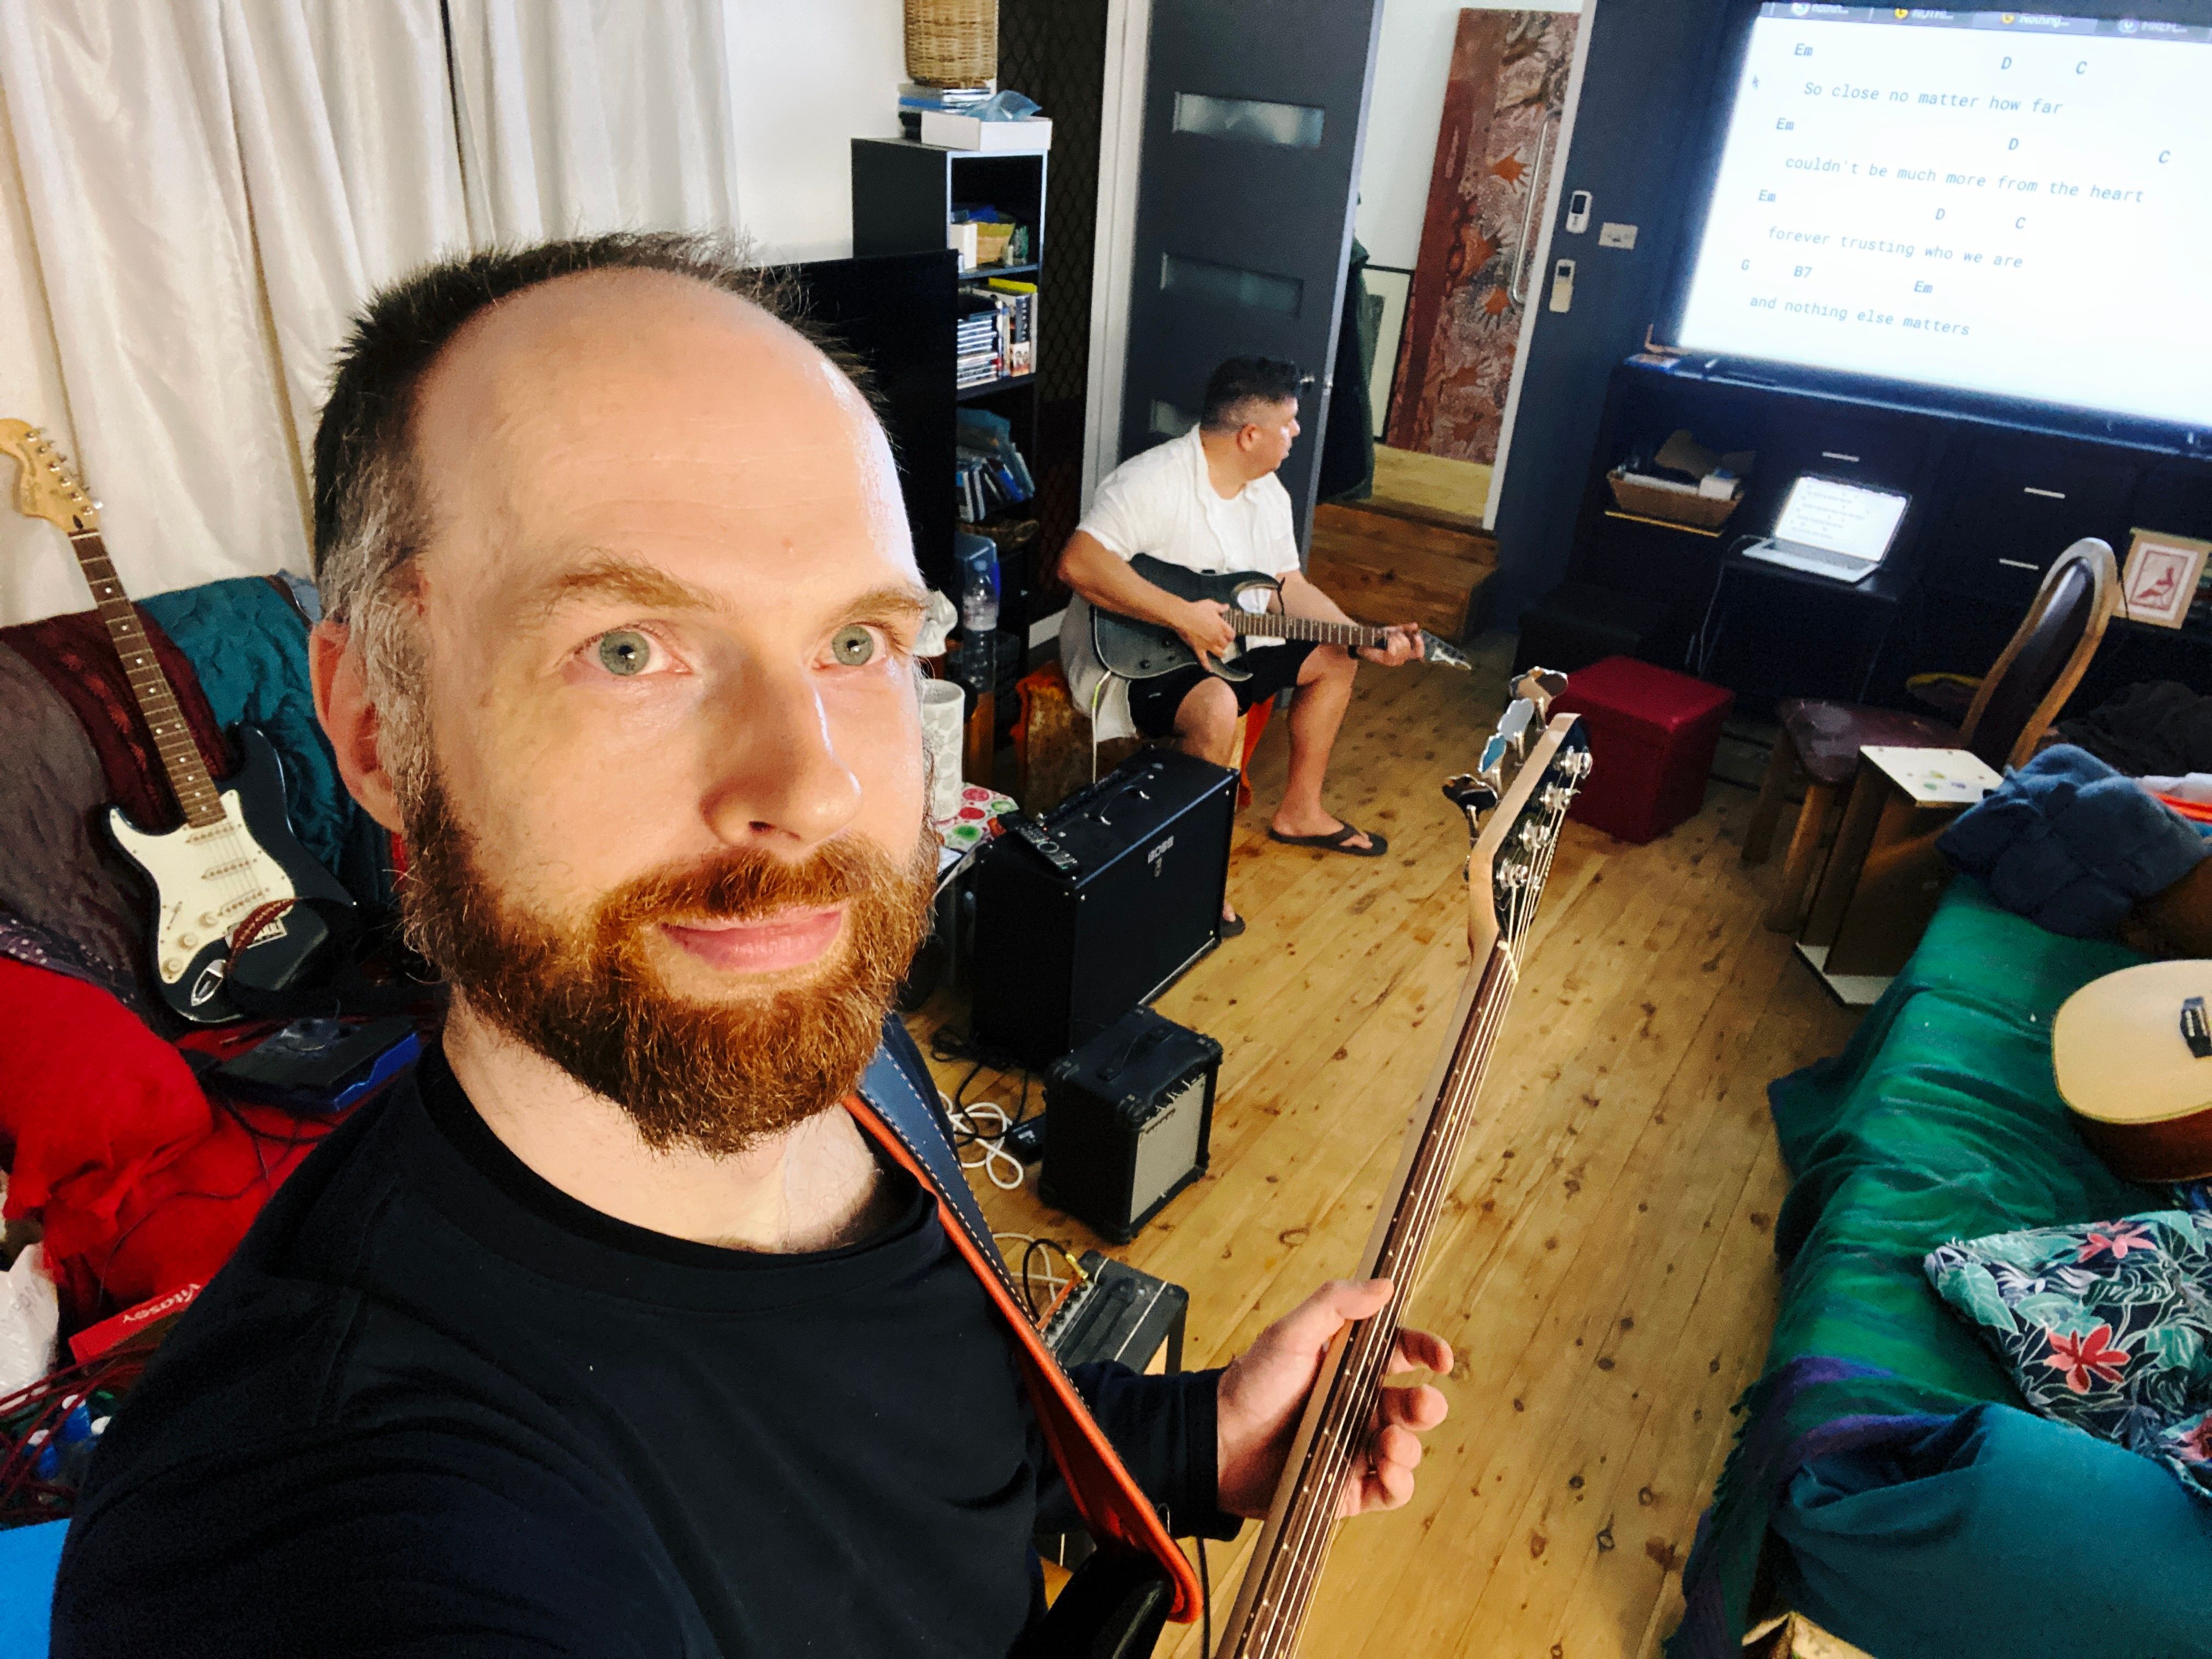 A photo of me, a white man with an increasingly-scruffy-looking red beard, holding a bass guitar and smiling at the camera. My friend is sitting behind me holding a guitar and looking at a large TV where the basic chord progression for Metallica's Nothing Else Matters.